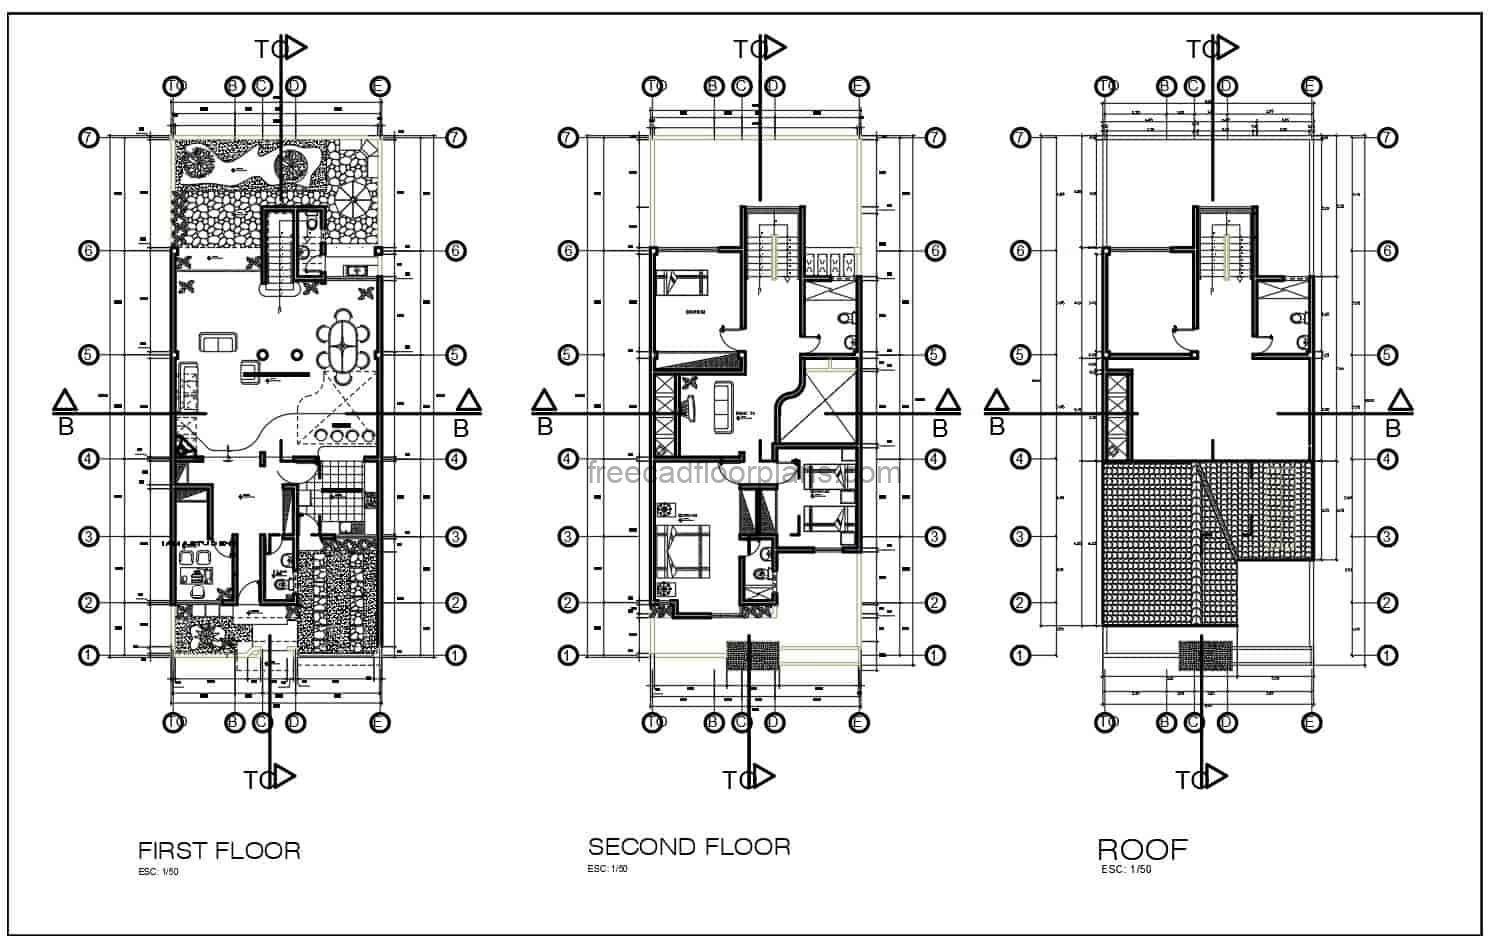 DWG floor plan of a two and a half level residence with three bedrooms in the private area of the second level, basic layout, living room, kitchen, dining room, front and back garden, indoor bar and laundry area. The roof area has a bedroom and bathroom, free downloadable plans in DWG format with dimensions and foundation and floor plans.